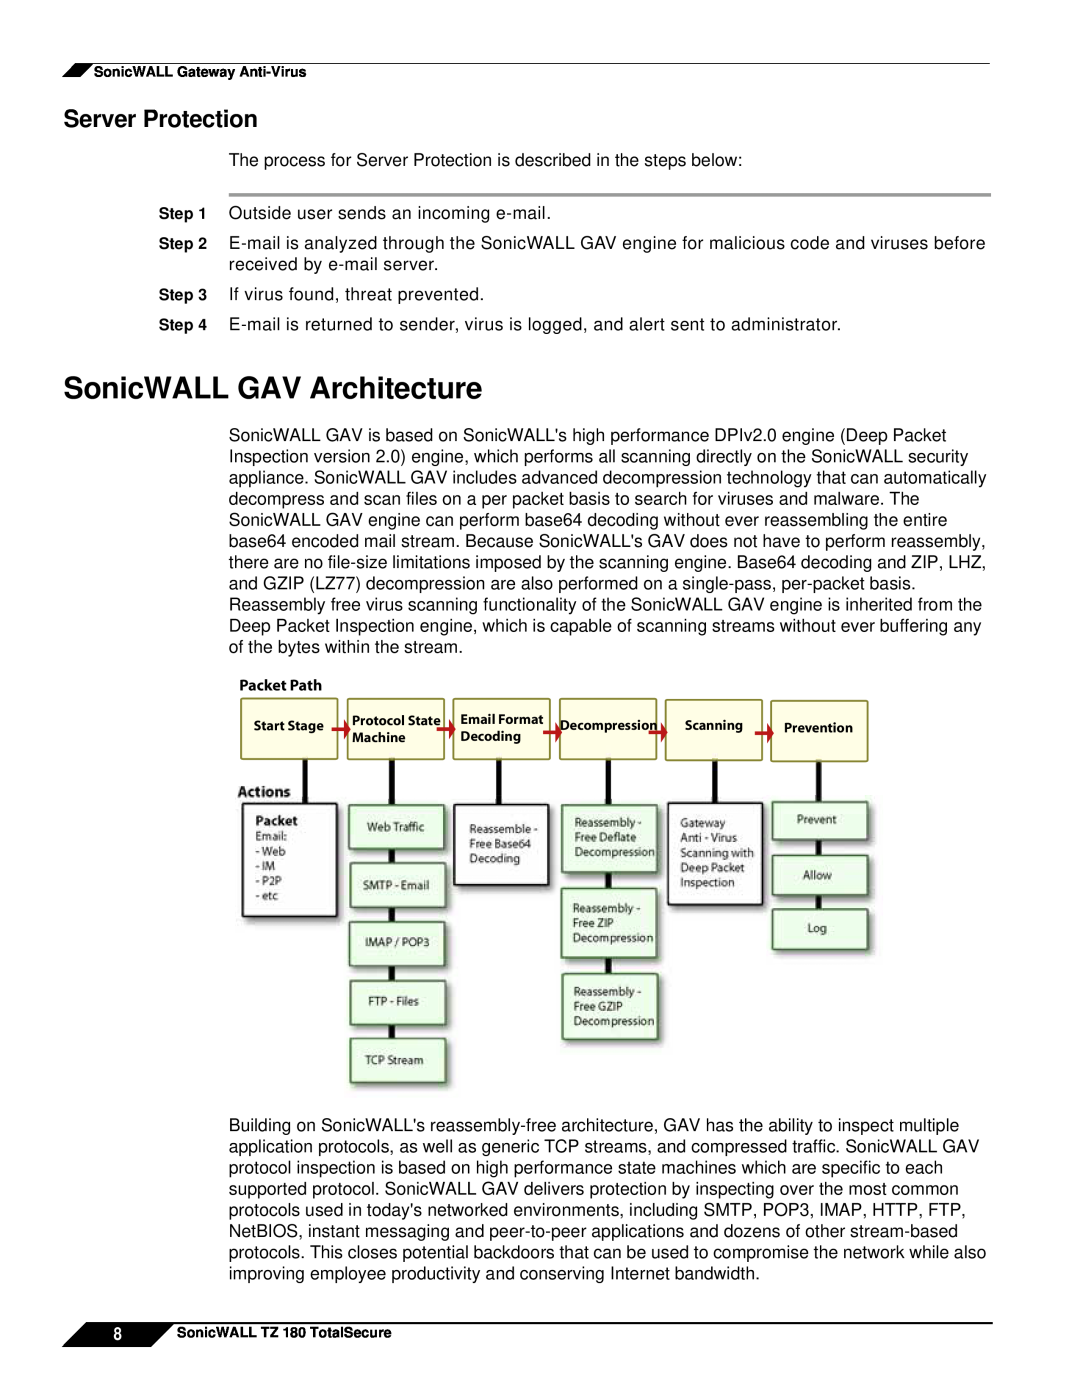 SonicWALL TZ 180 manual SonicWALL GAV Architecture, Server Protection 